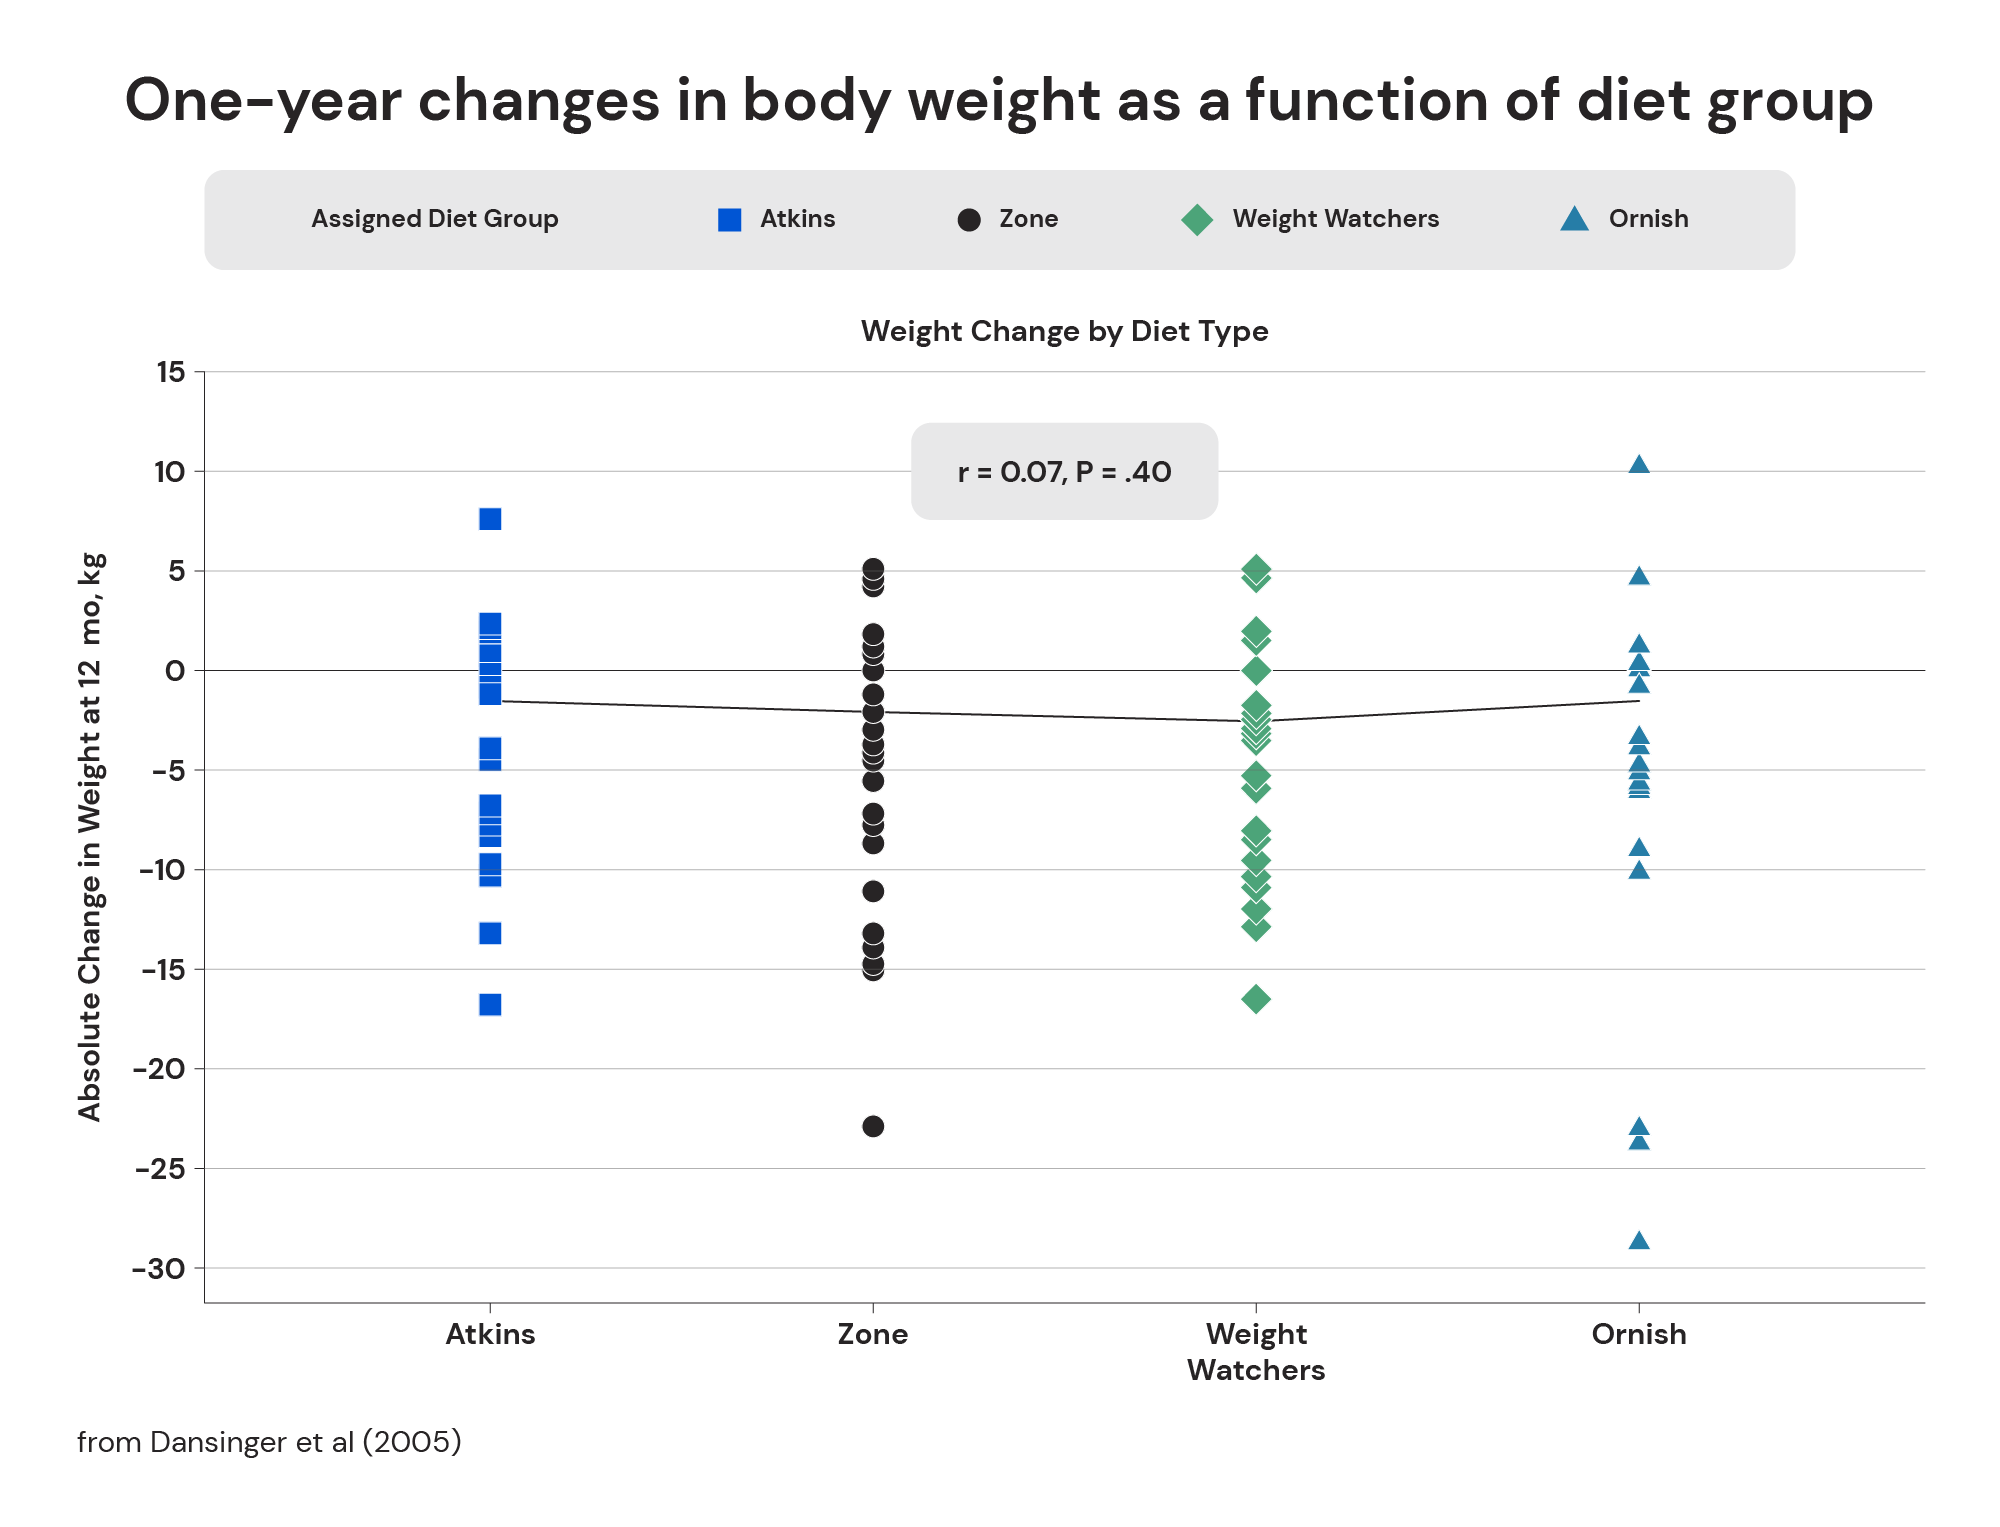 One-year changes in body weight as a function of diet group from Dansinger et al